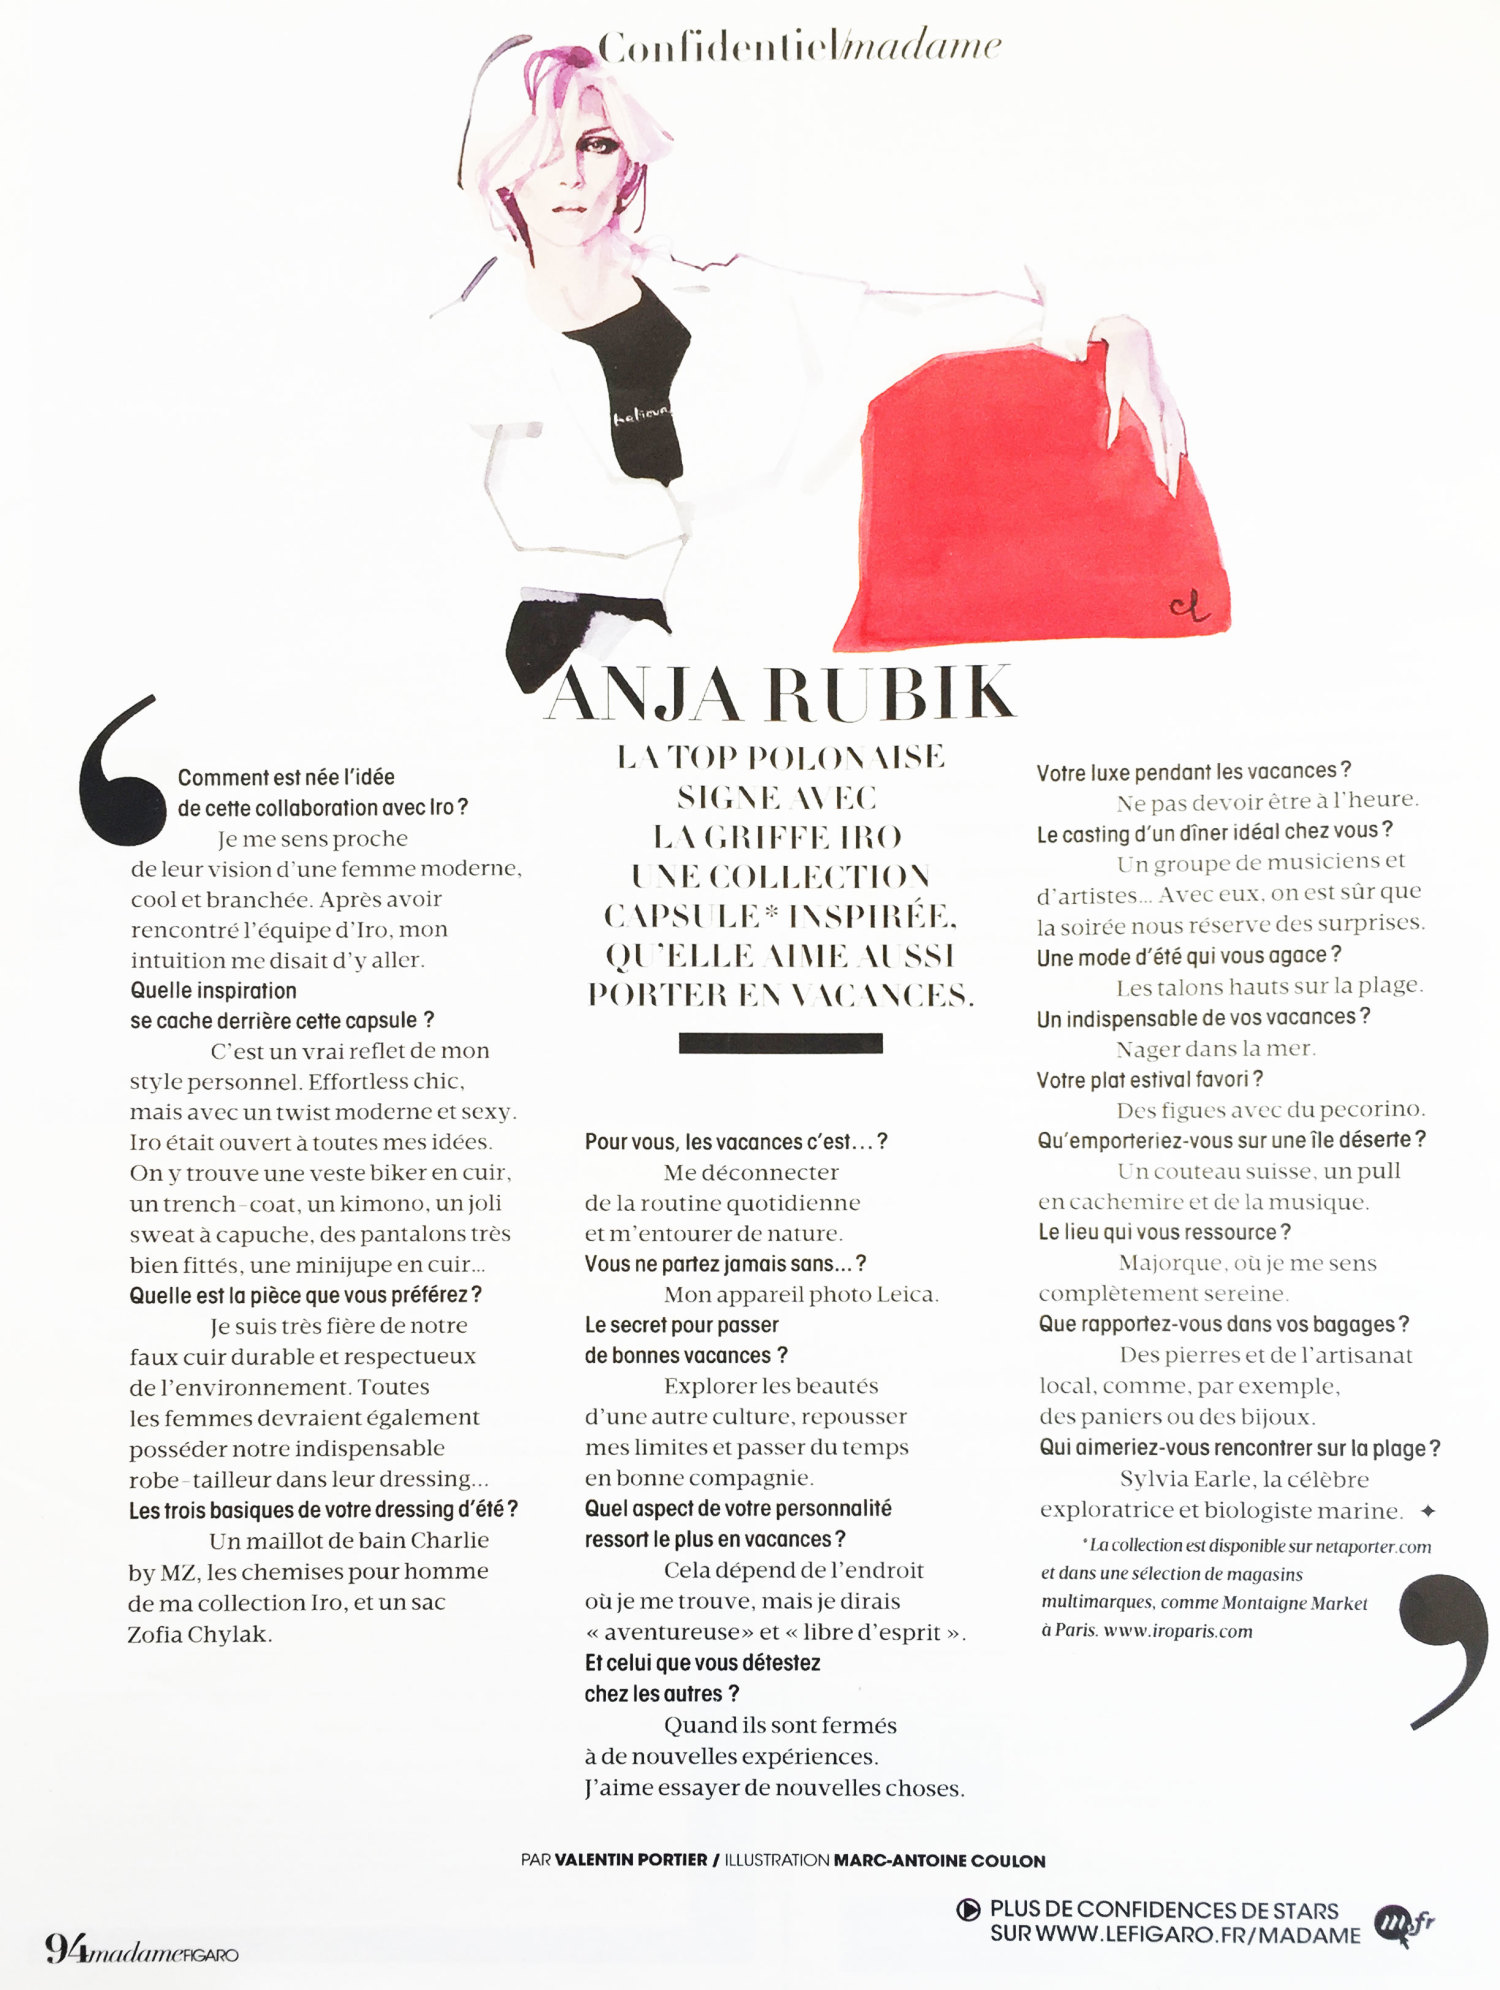 Le Figaro Madame August 2016